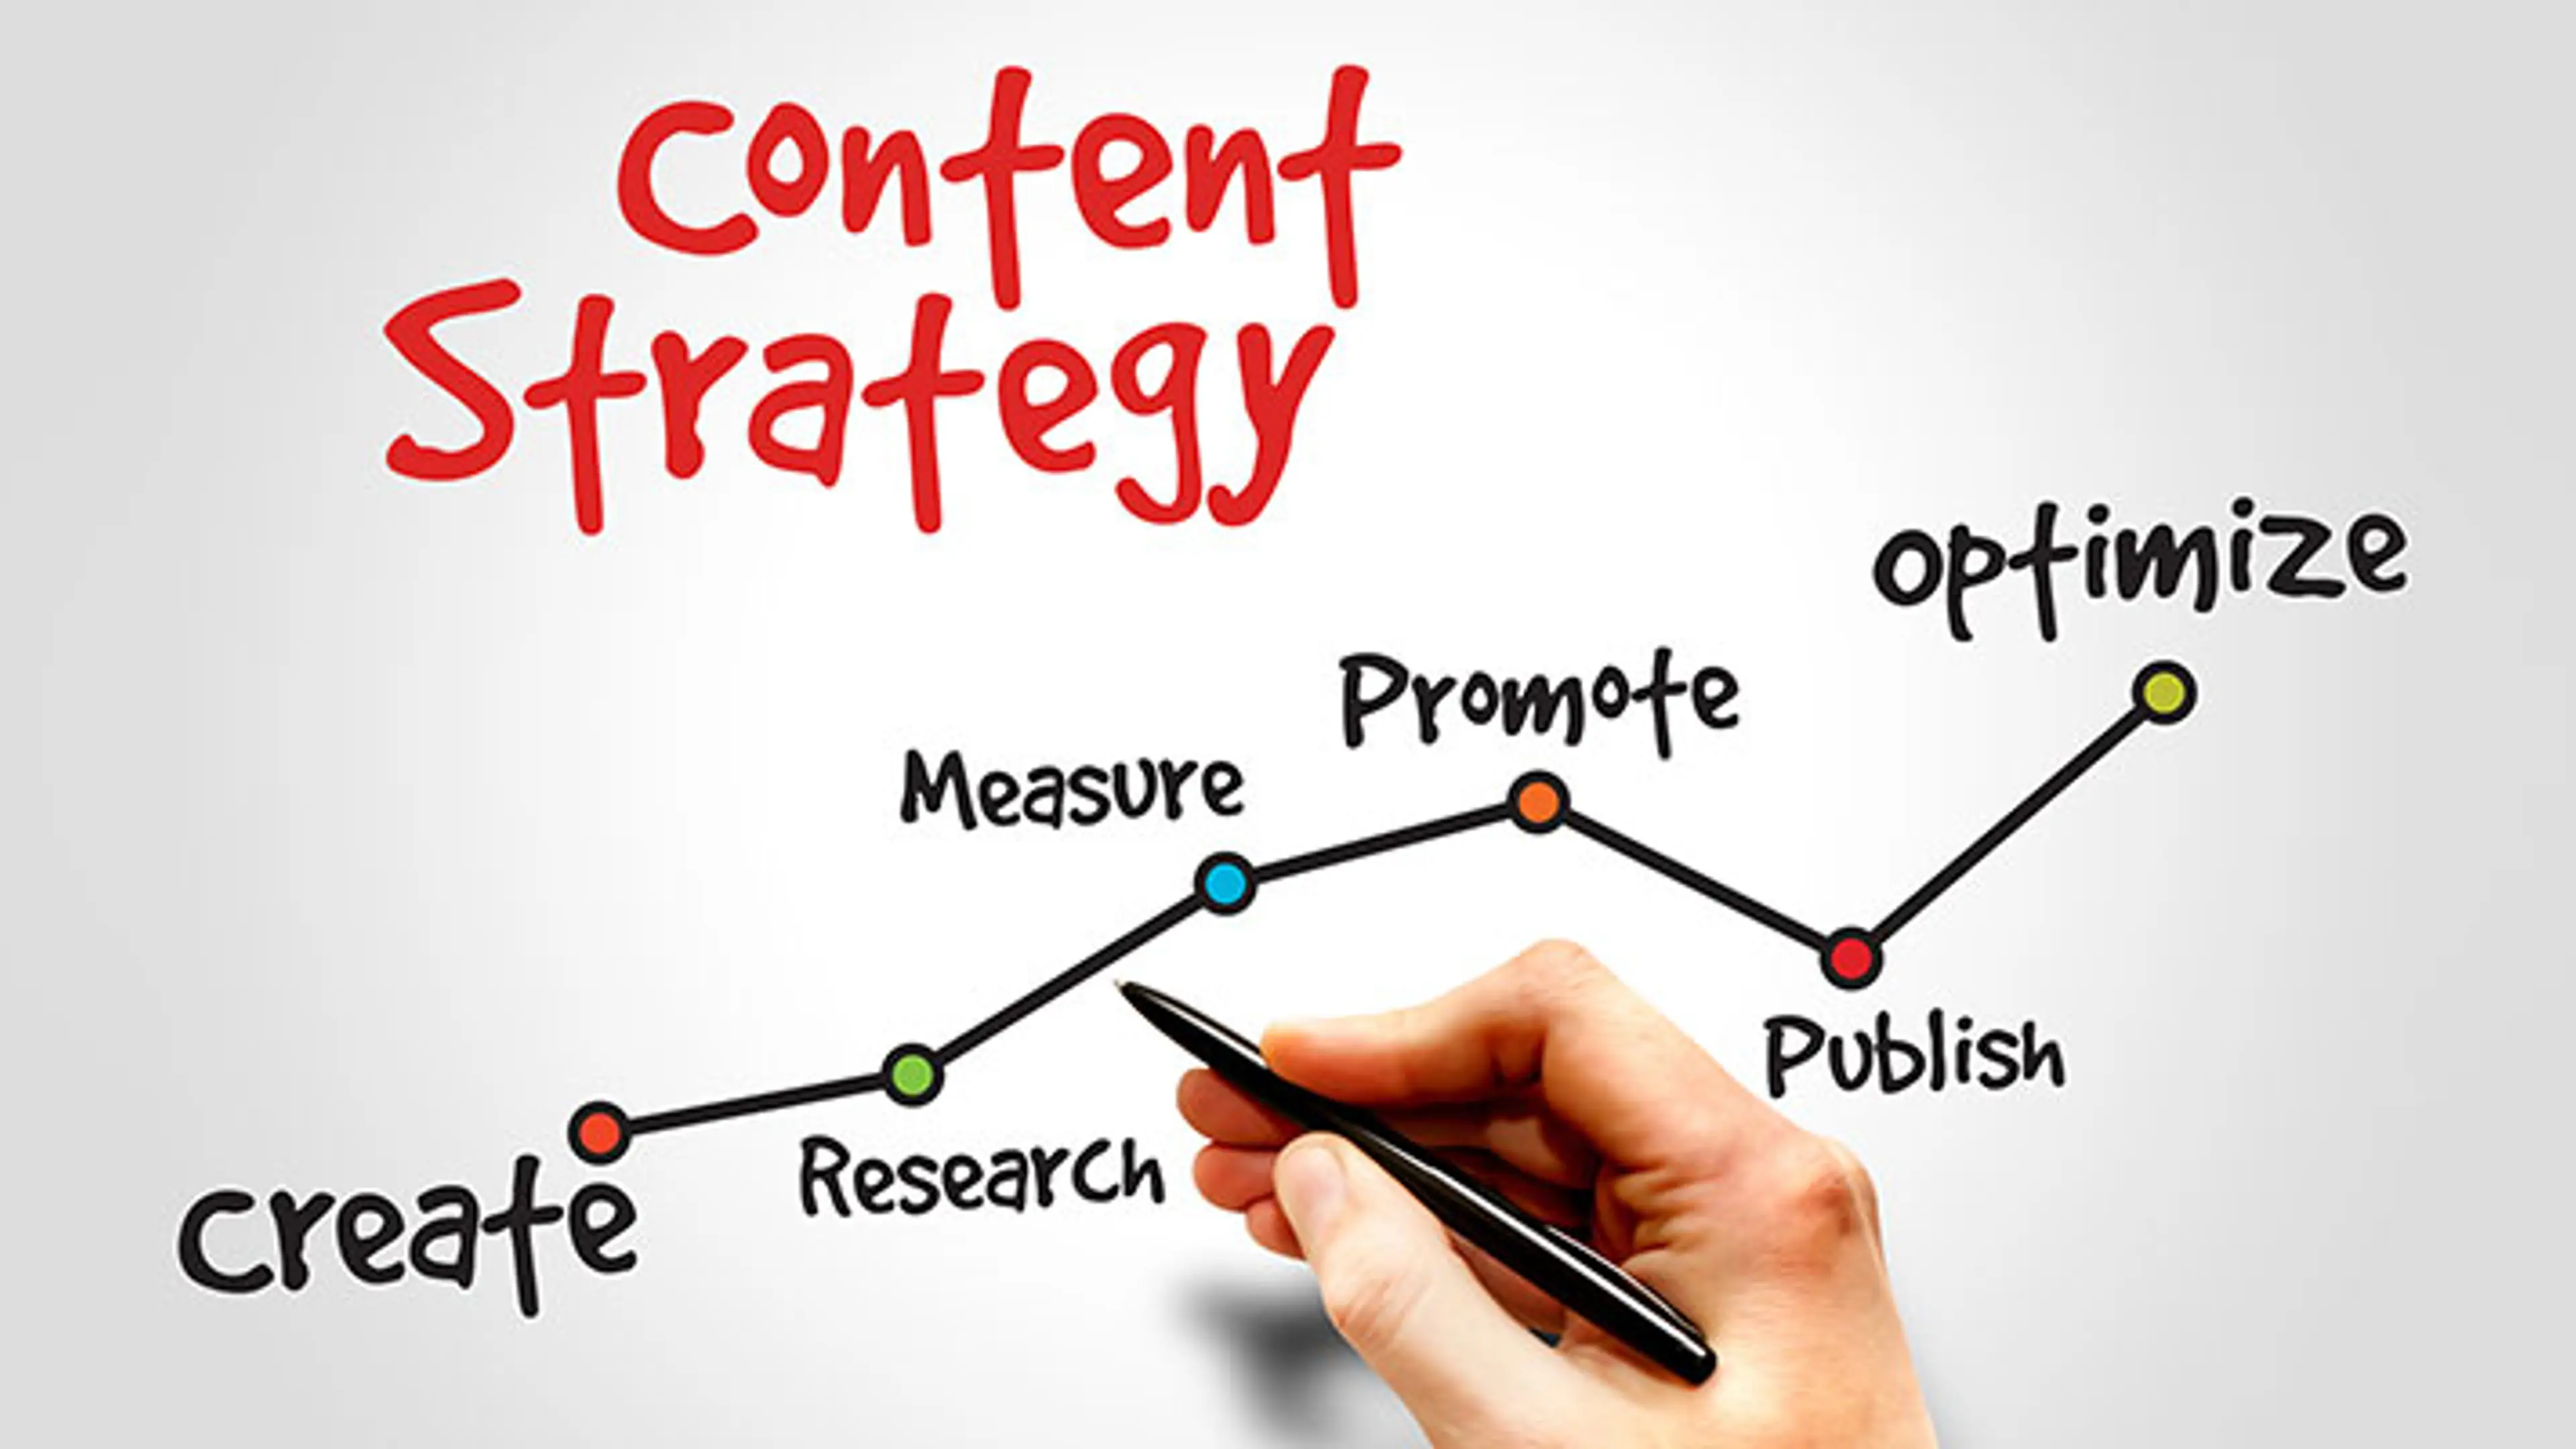 Content marketing is not just writing blogs